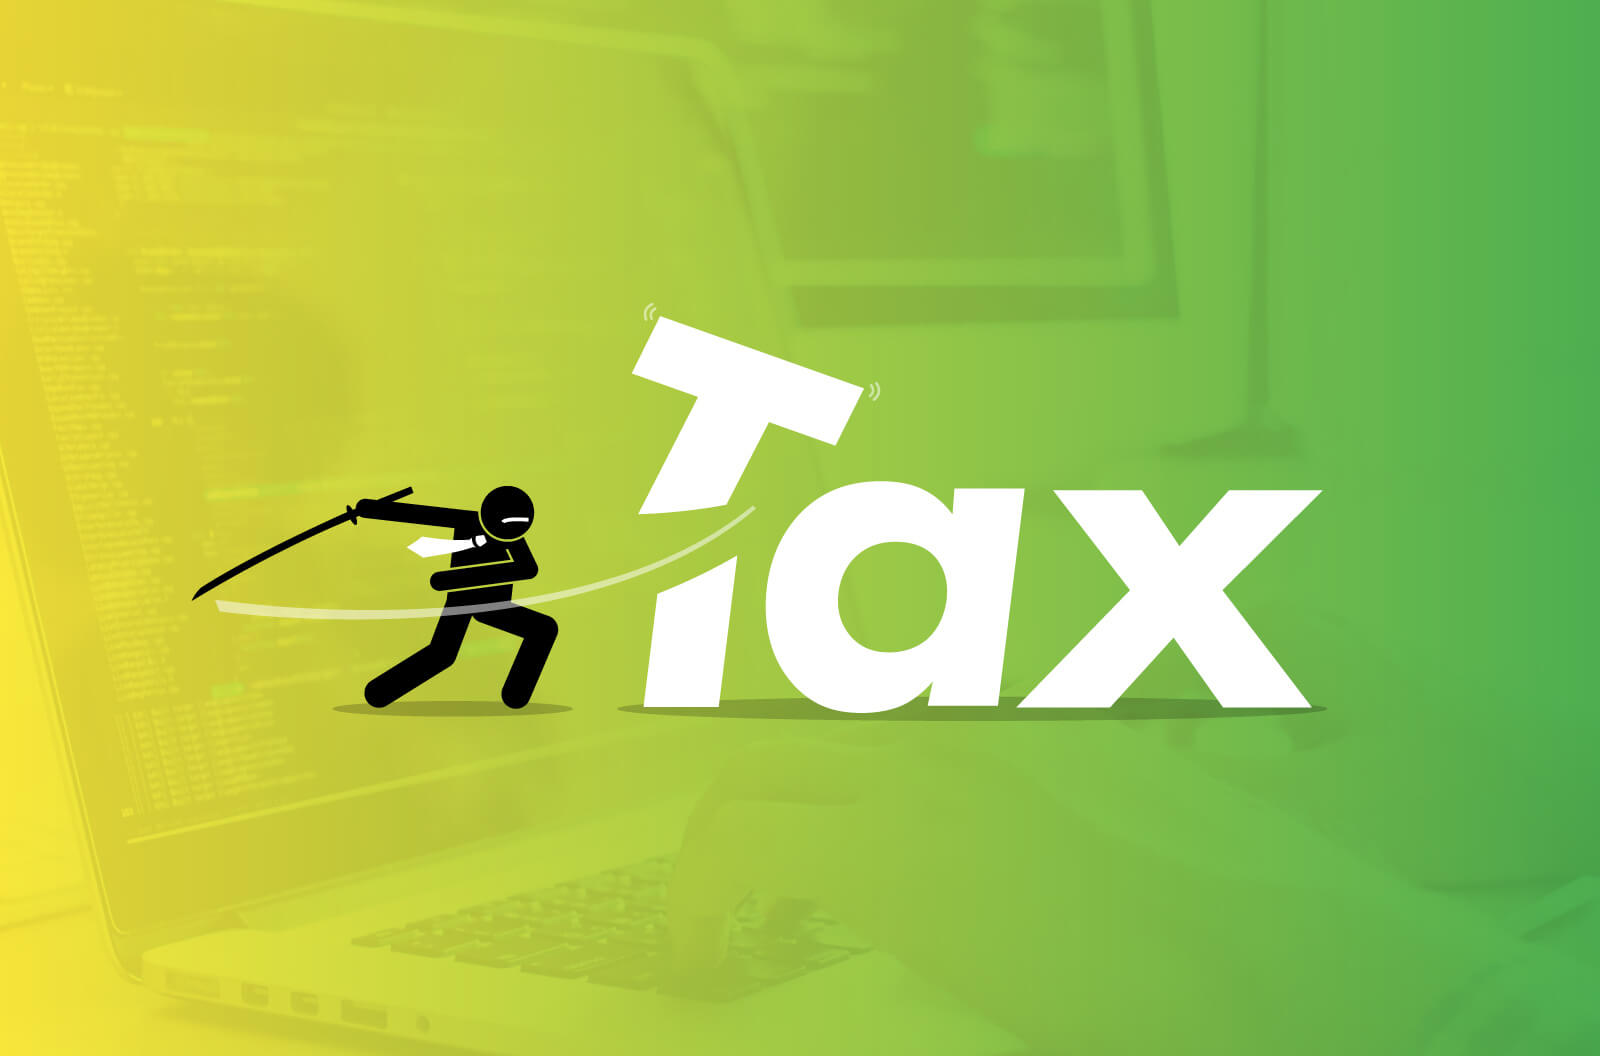 2023 Website Tax Guide - What Website Costs Can I Claim? Robert Mullineux